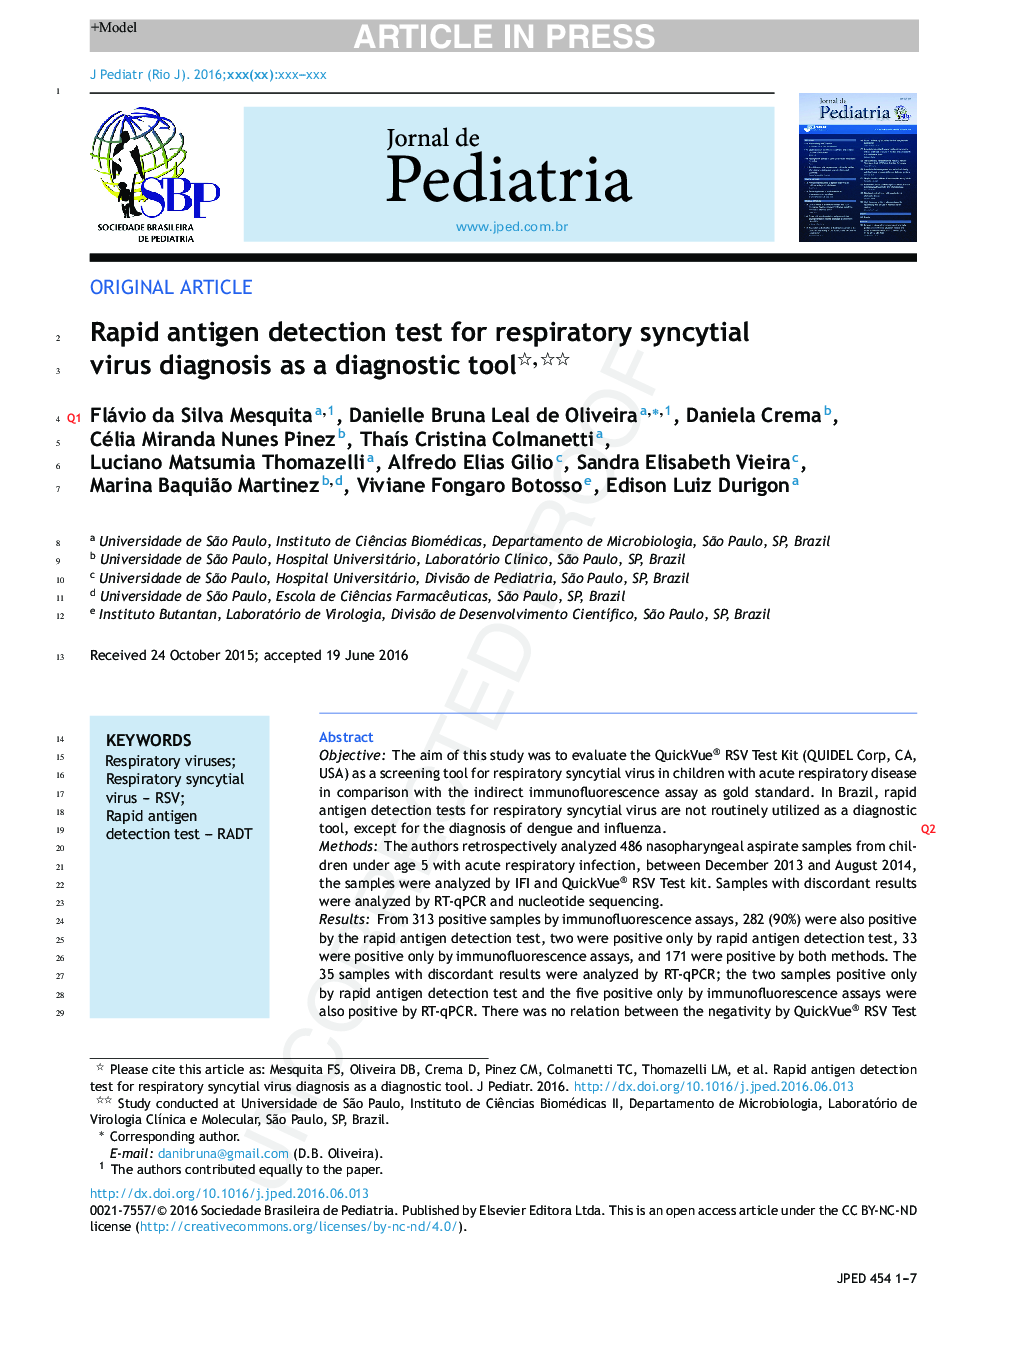 Rapid antigen detection test for respiratory syncytial virus diagnosis as a diagnostic tool